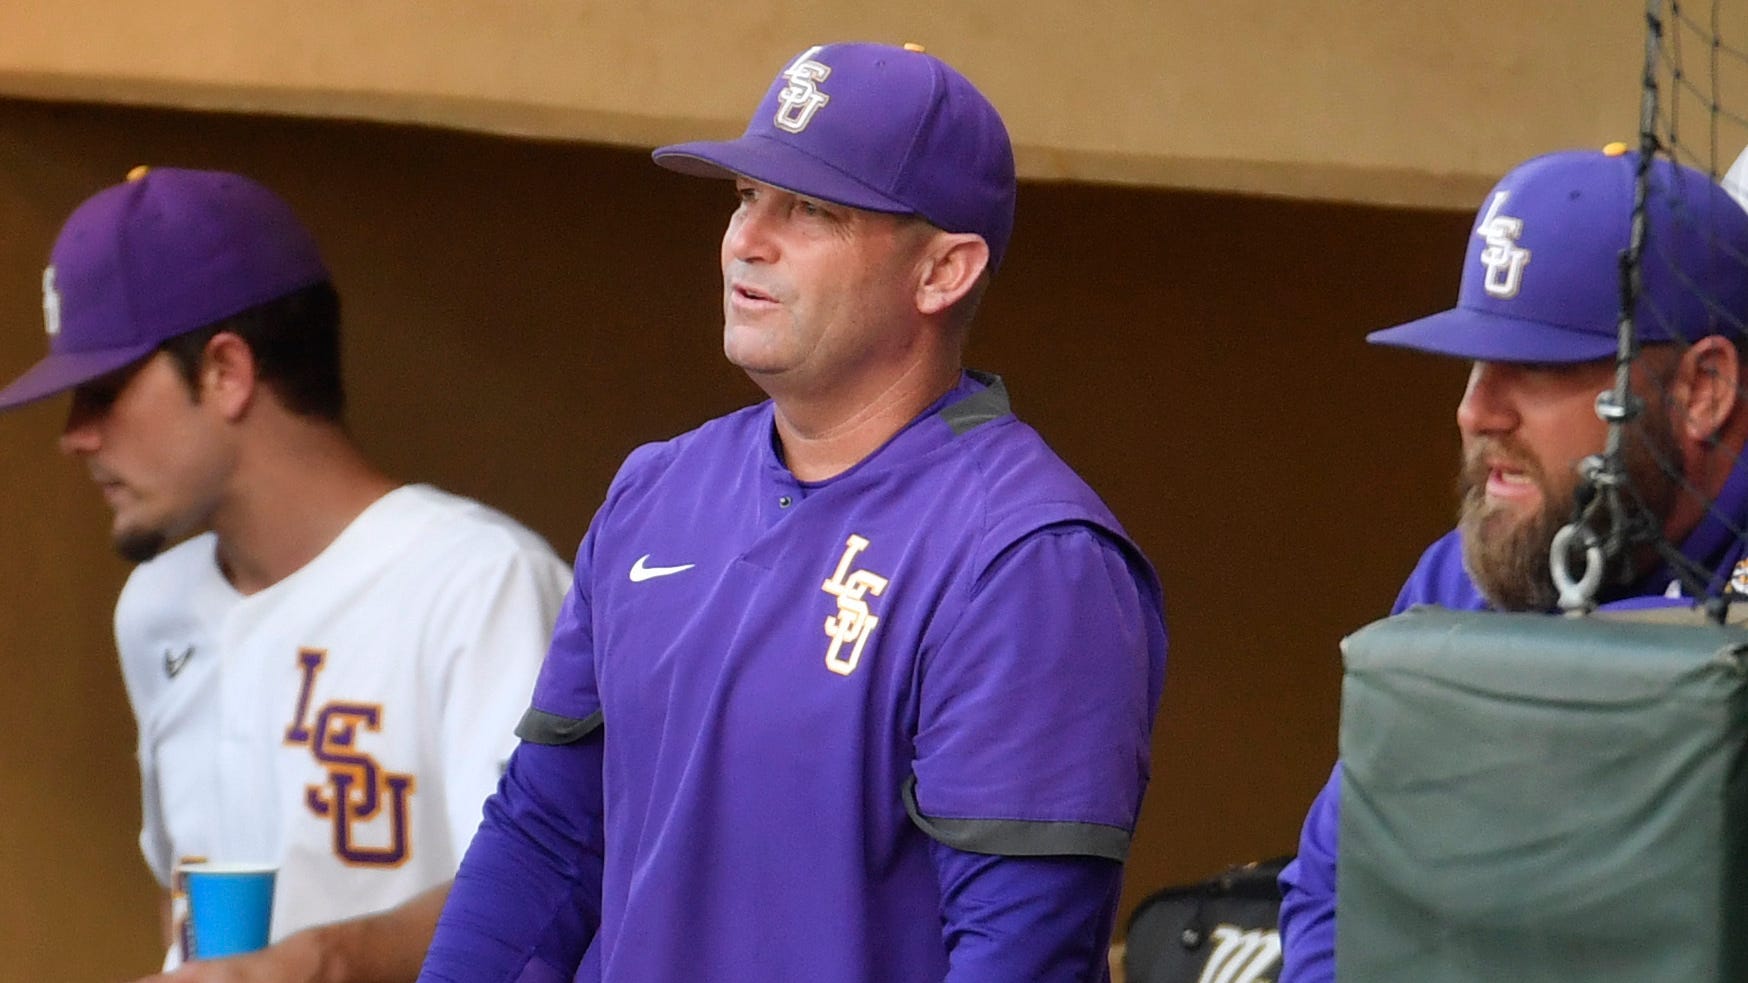   
																LSU baseball signee and top prospect Paxton Kling pulls out of 2022 MLB Draft 
															 